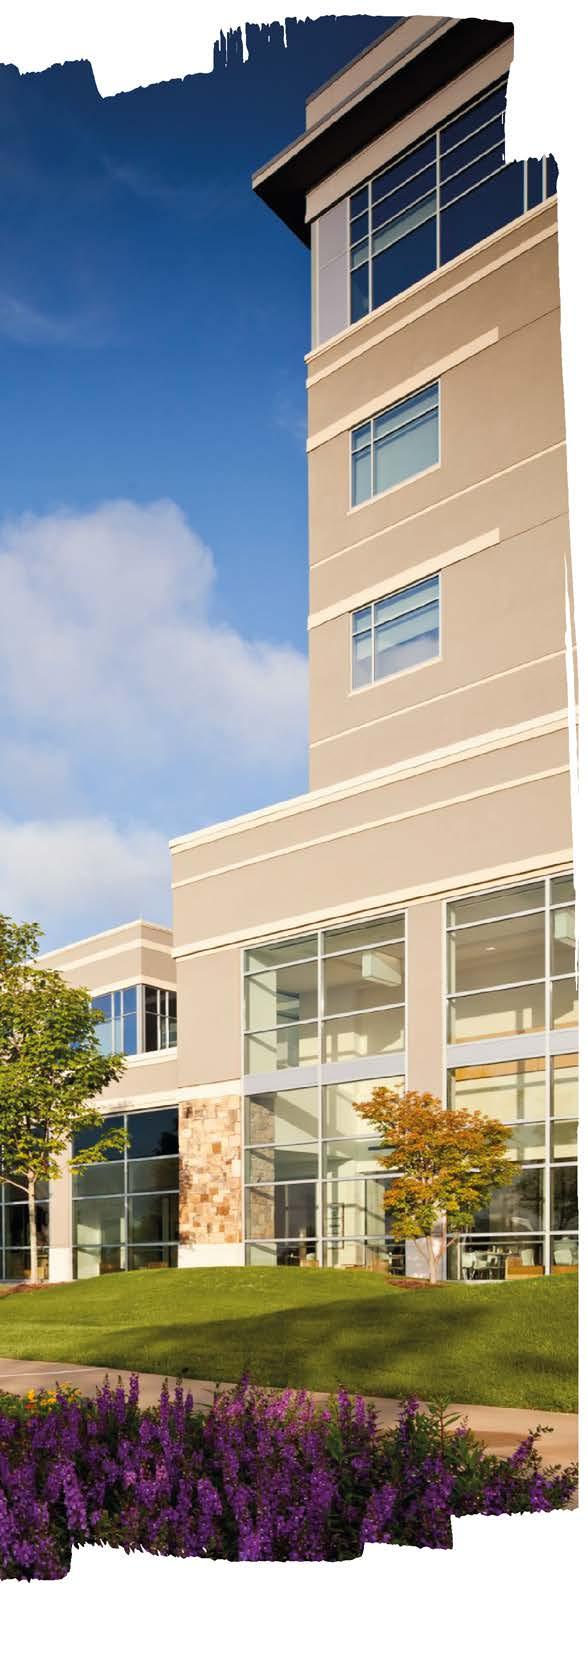 13 Local Spotlights Northern California: Demand for outpatient facility construction in Northern California remains high despite construction cost increases outpacing the overall local market